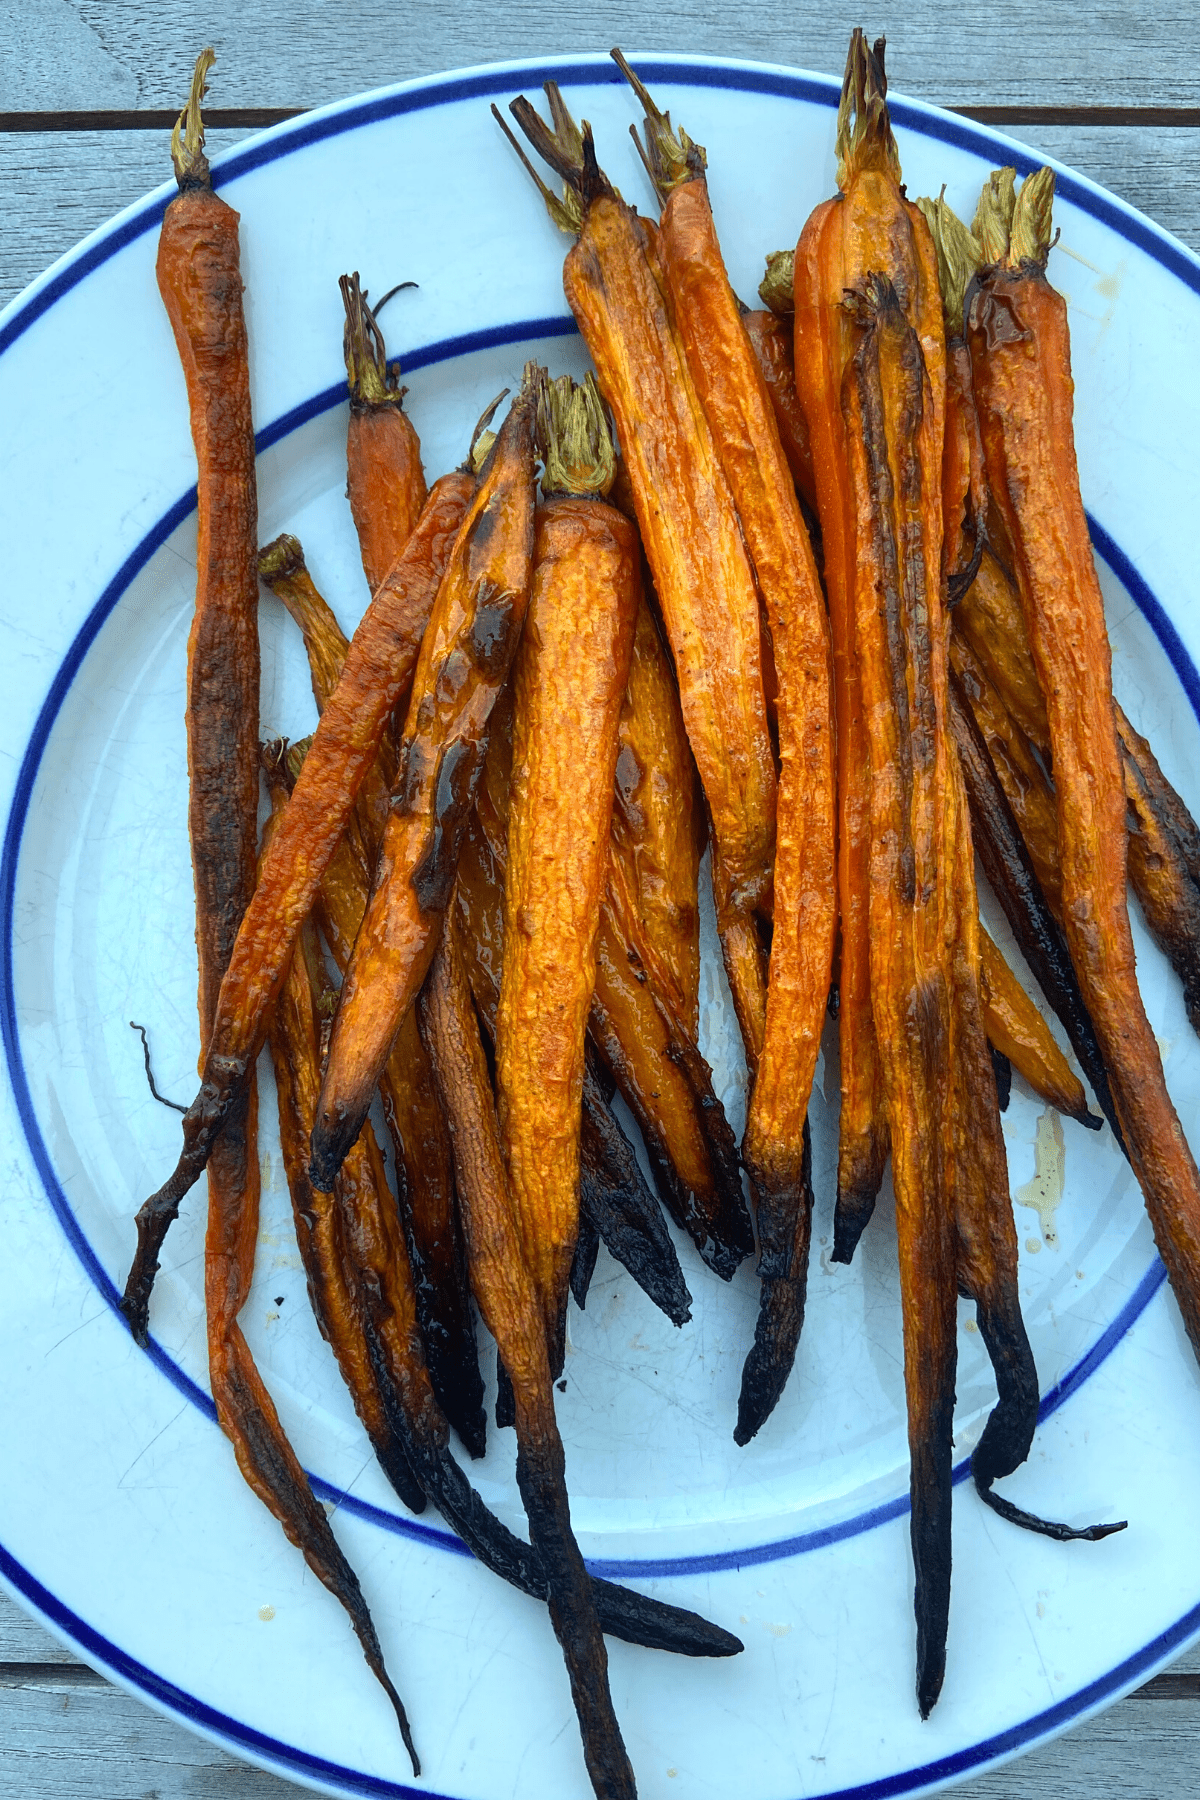 crispy roasted carrots piled on a white plate with blue rim